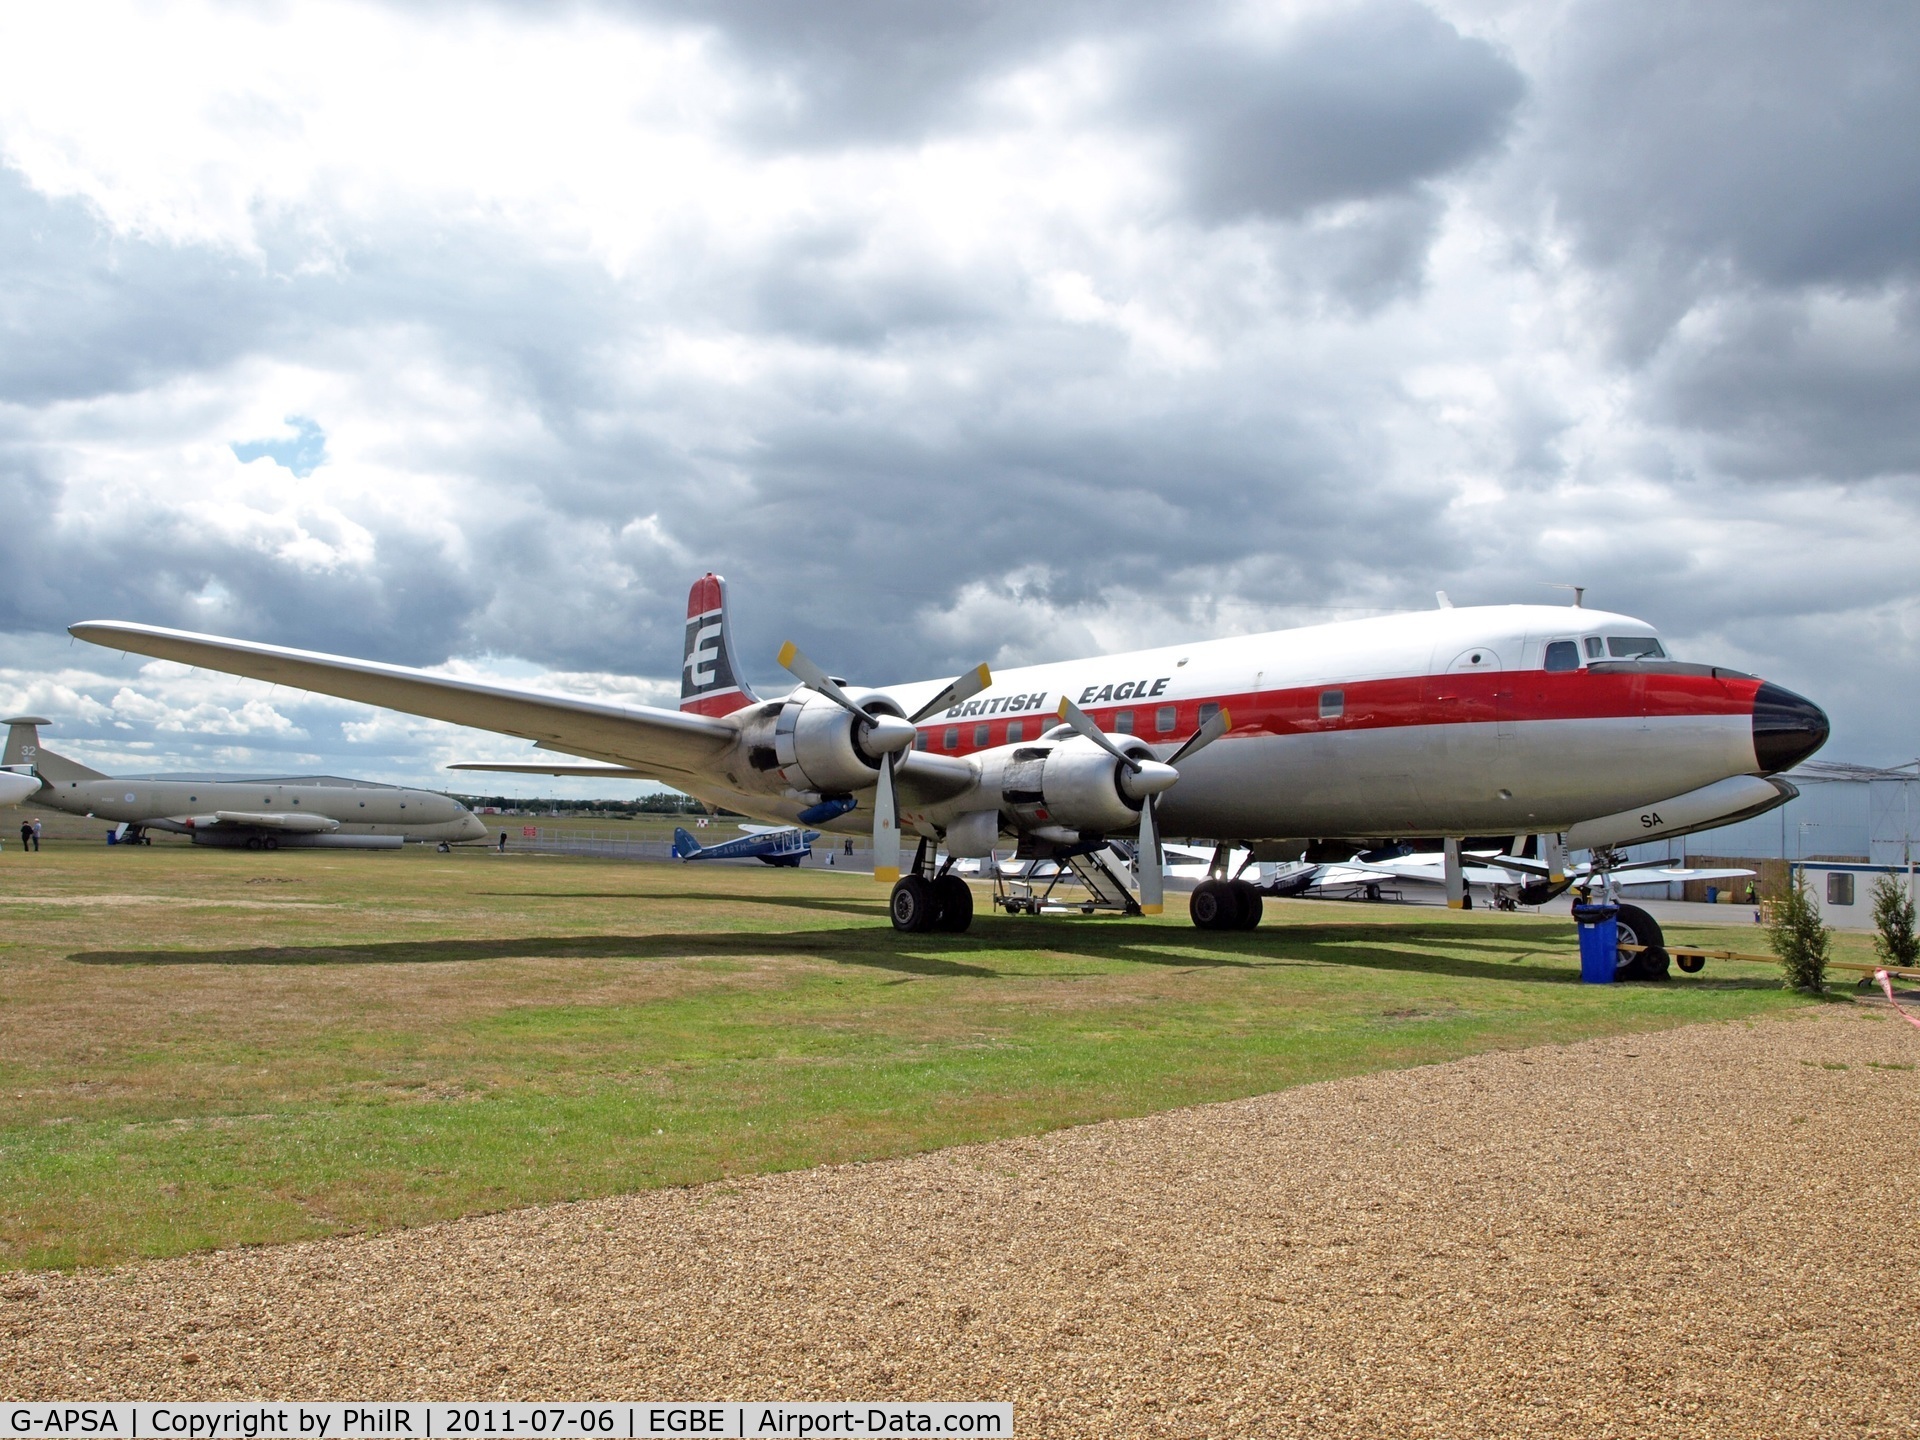 G-APSA, 1958 Douglas DC-6A C/N 45497, 1958 airframe that flew in Canada, the UK, Saudi Arabia and the Yemen. Brought back to the UK in 1987 having stood derelict at Sana'a for some years. Painted back into British Eagle colours in 2008 and grounded in 2012 with wing corrosion.